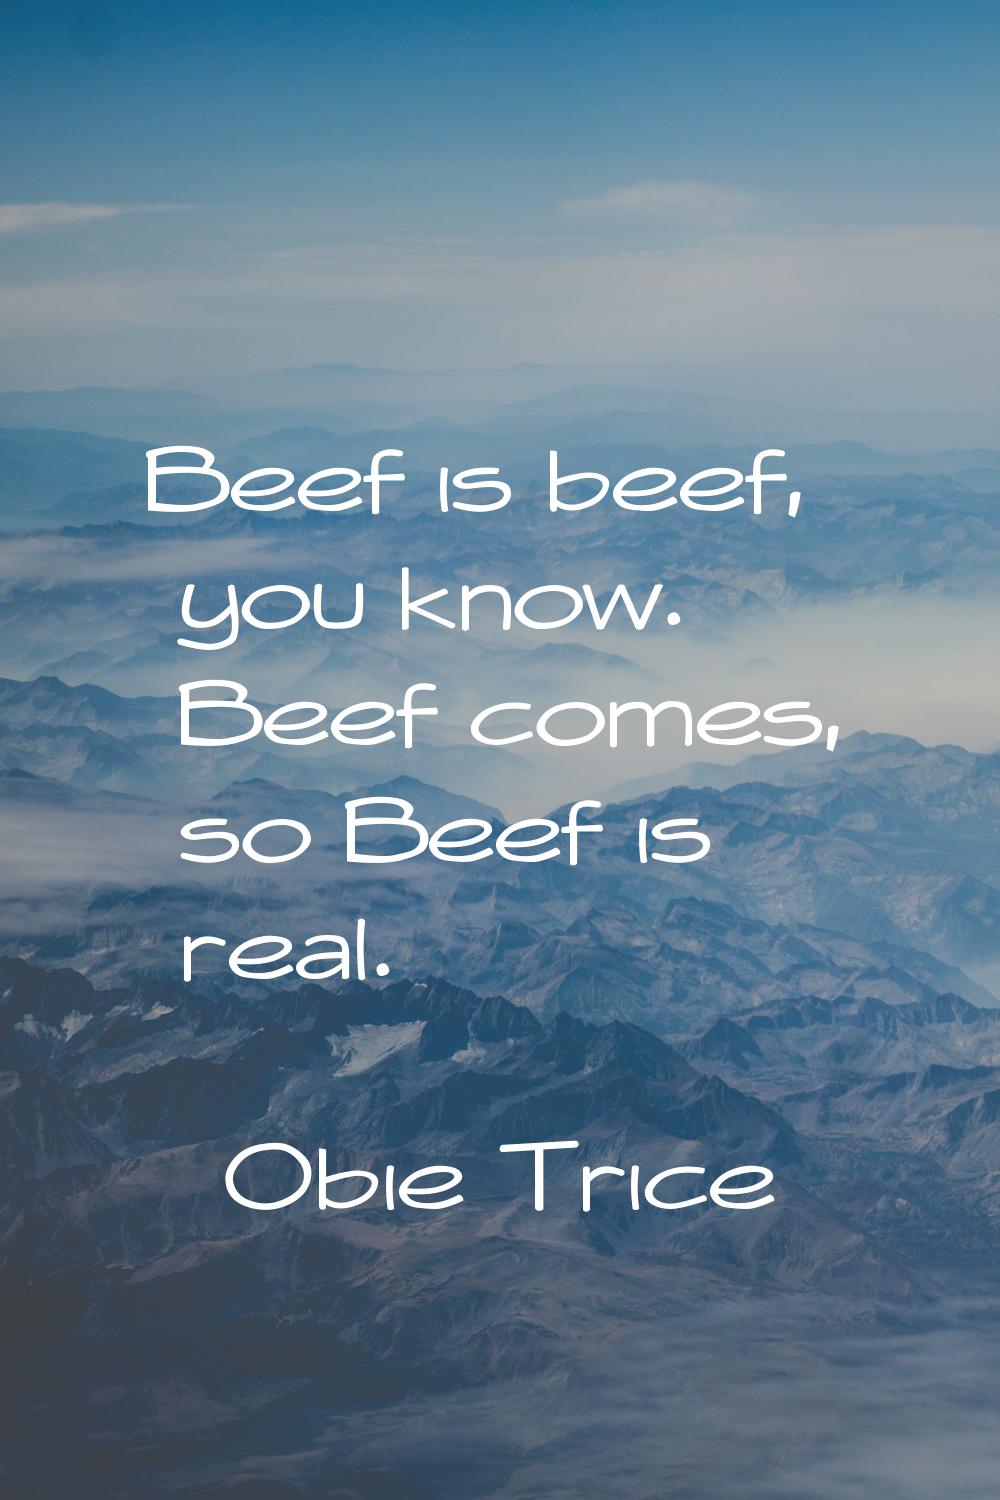 Beef is beef, you know. Beef comes, so Beef is real.